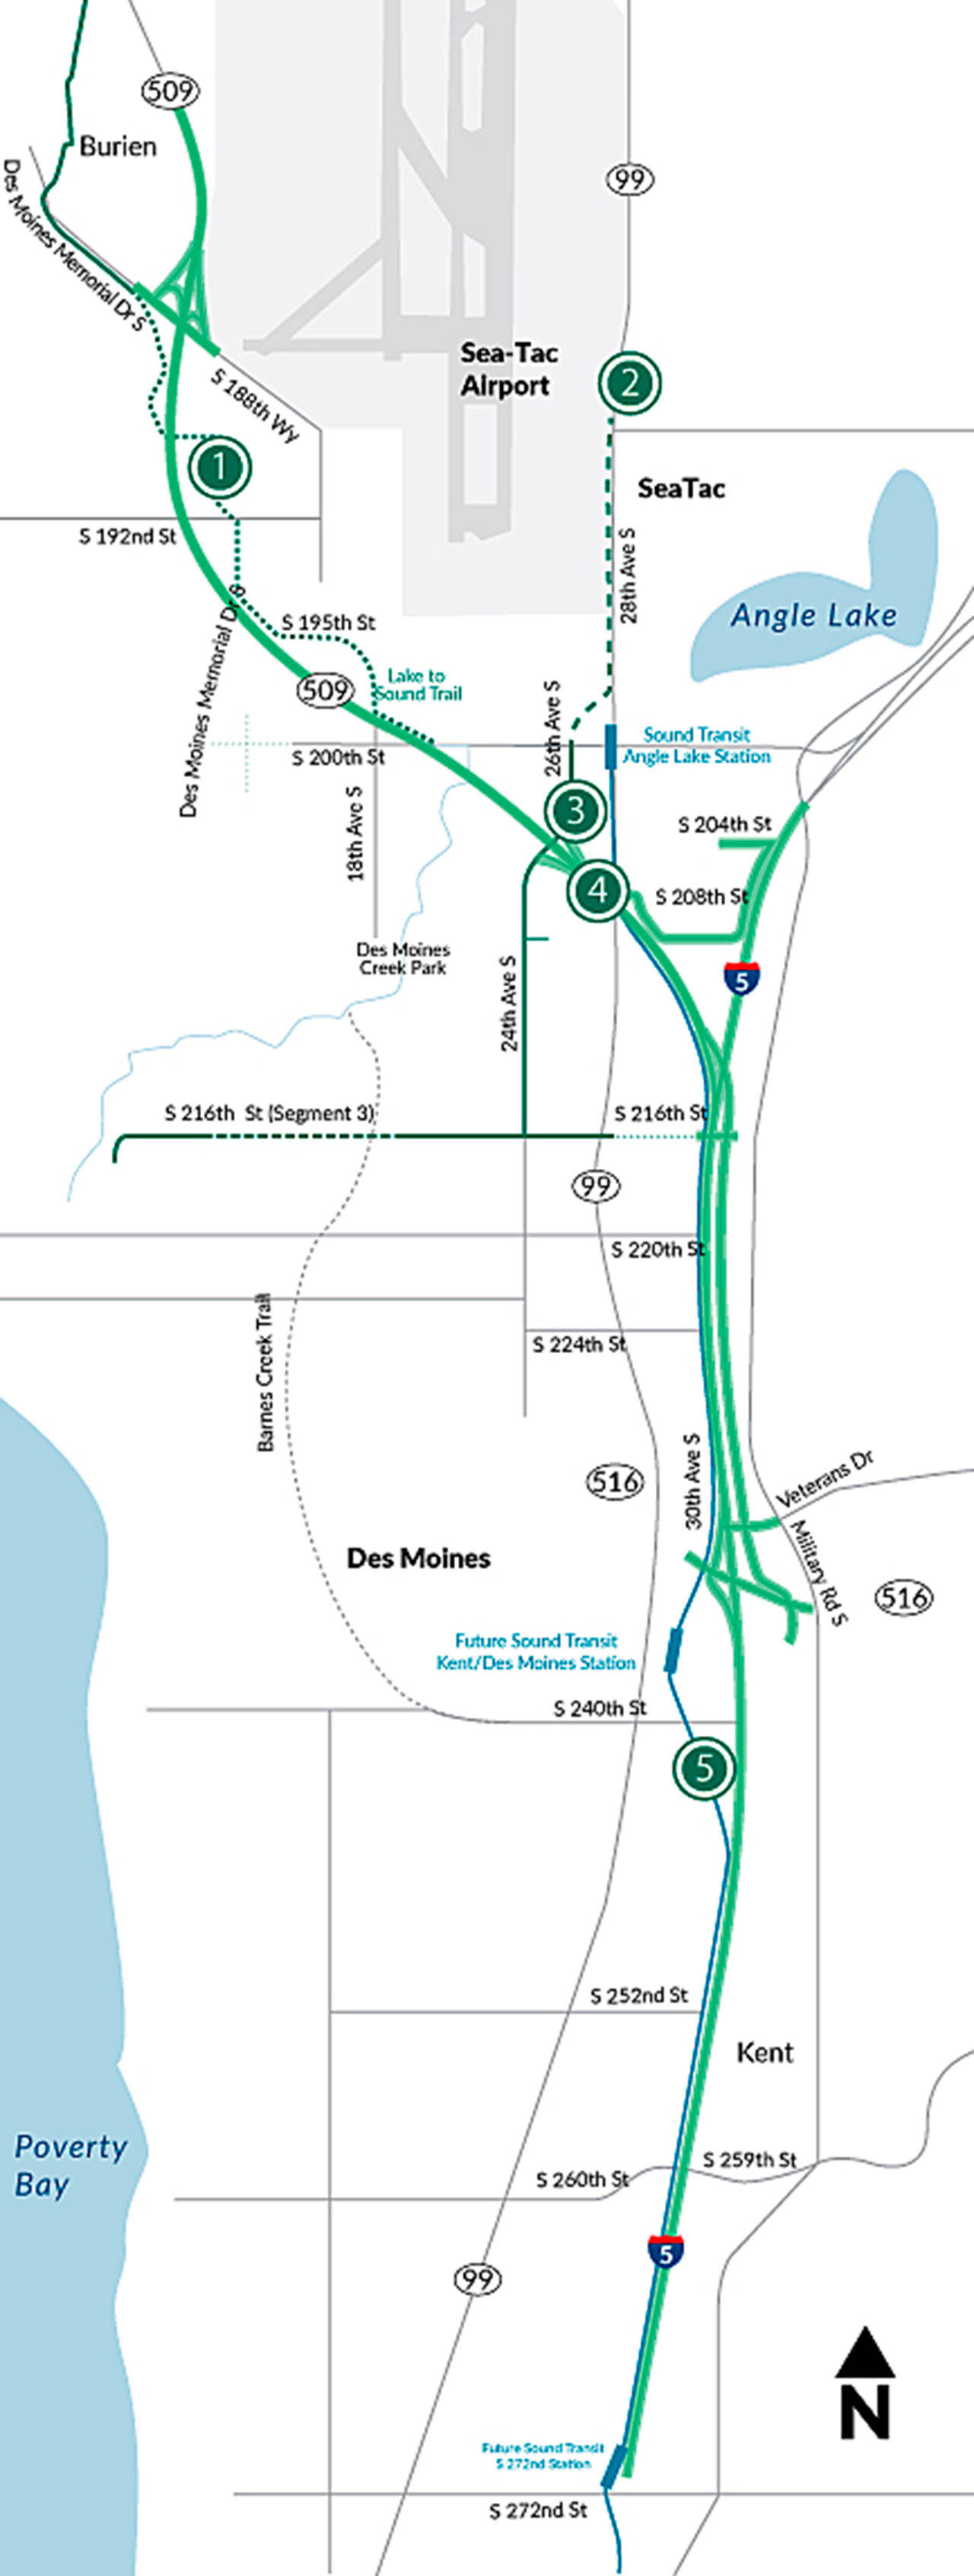 1) The SR 509 alignment will cross over the Lake to Sound Trail near South 200th St. 2) The project design accommodates the Port of Seattle’s concept for a South Airport Expressway from SR 509 to Sea-Tac Airport. 3) 28th/24th Avenue South connection in SeaTac. 4) All lanes on the new portion of SR 509 will be tolled using one electronic toll point. 5) State DOT is working closely with Sound Transit as both agencies work to build new major infrastructure projects in the area. COURTESY GRAPHIC, State DOT